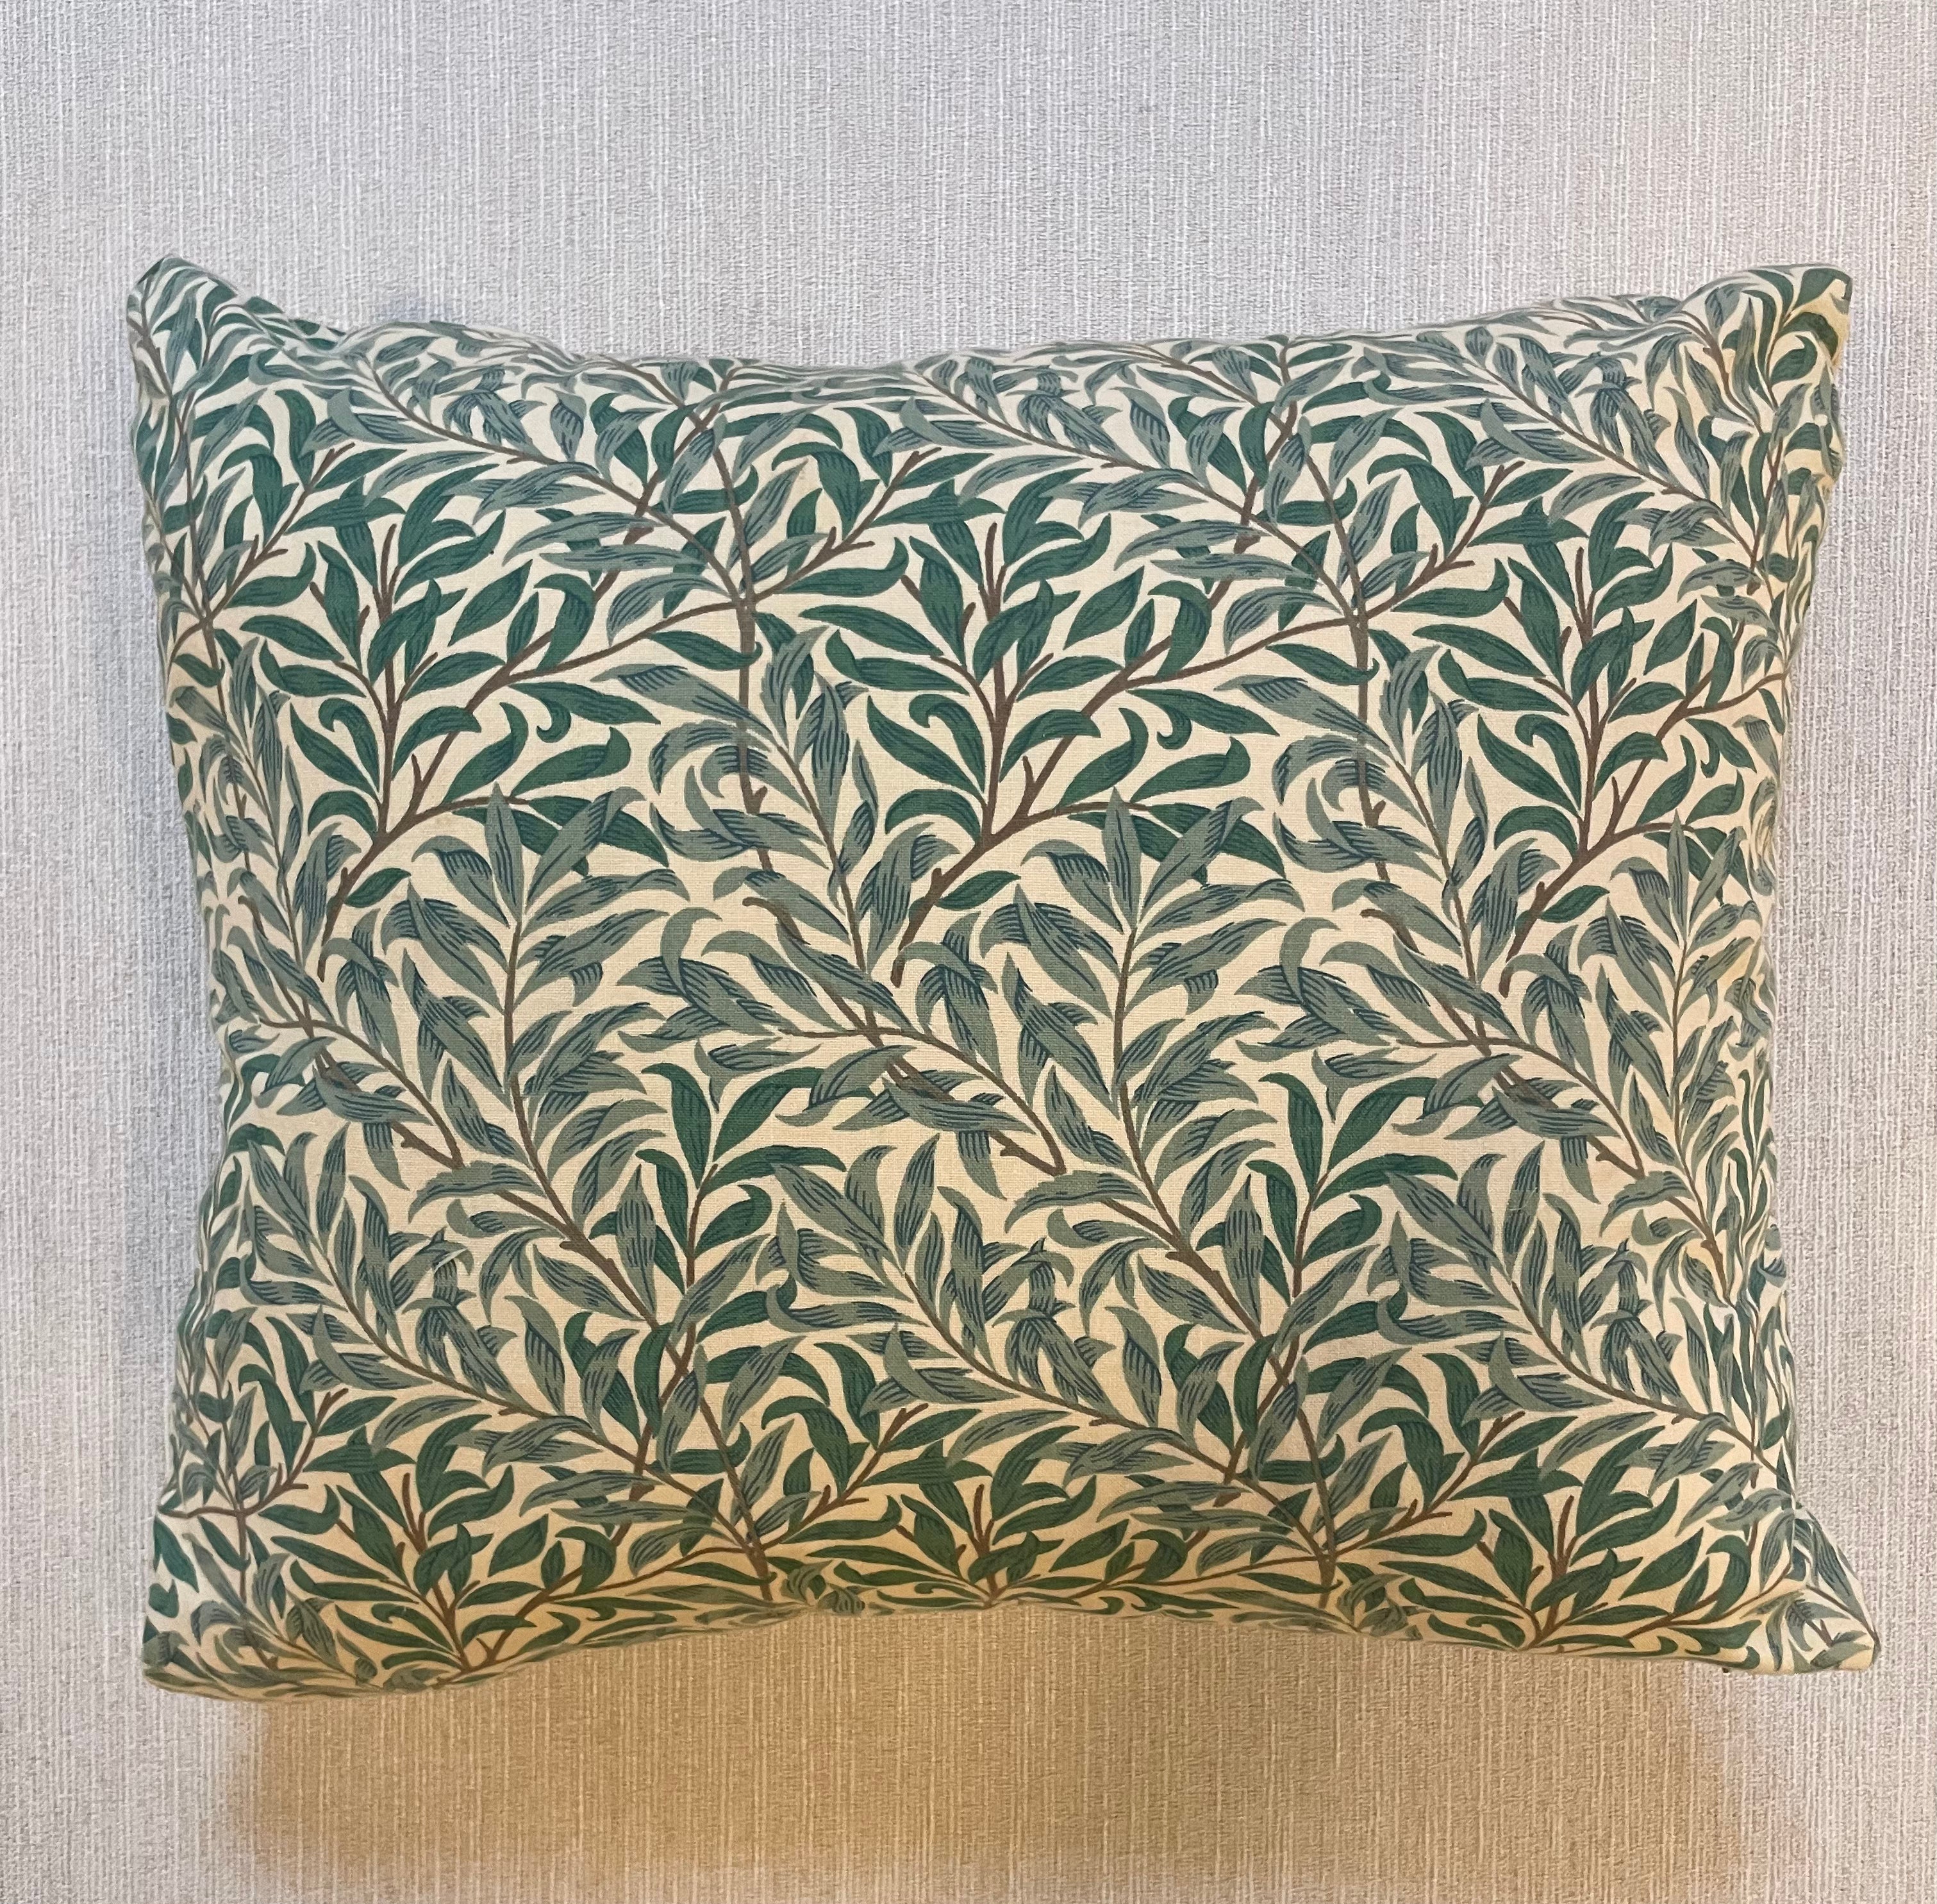 Willow Bough Pillow by William Morris